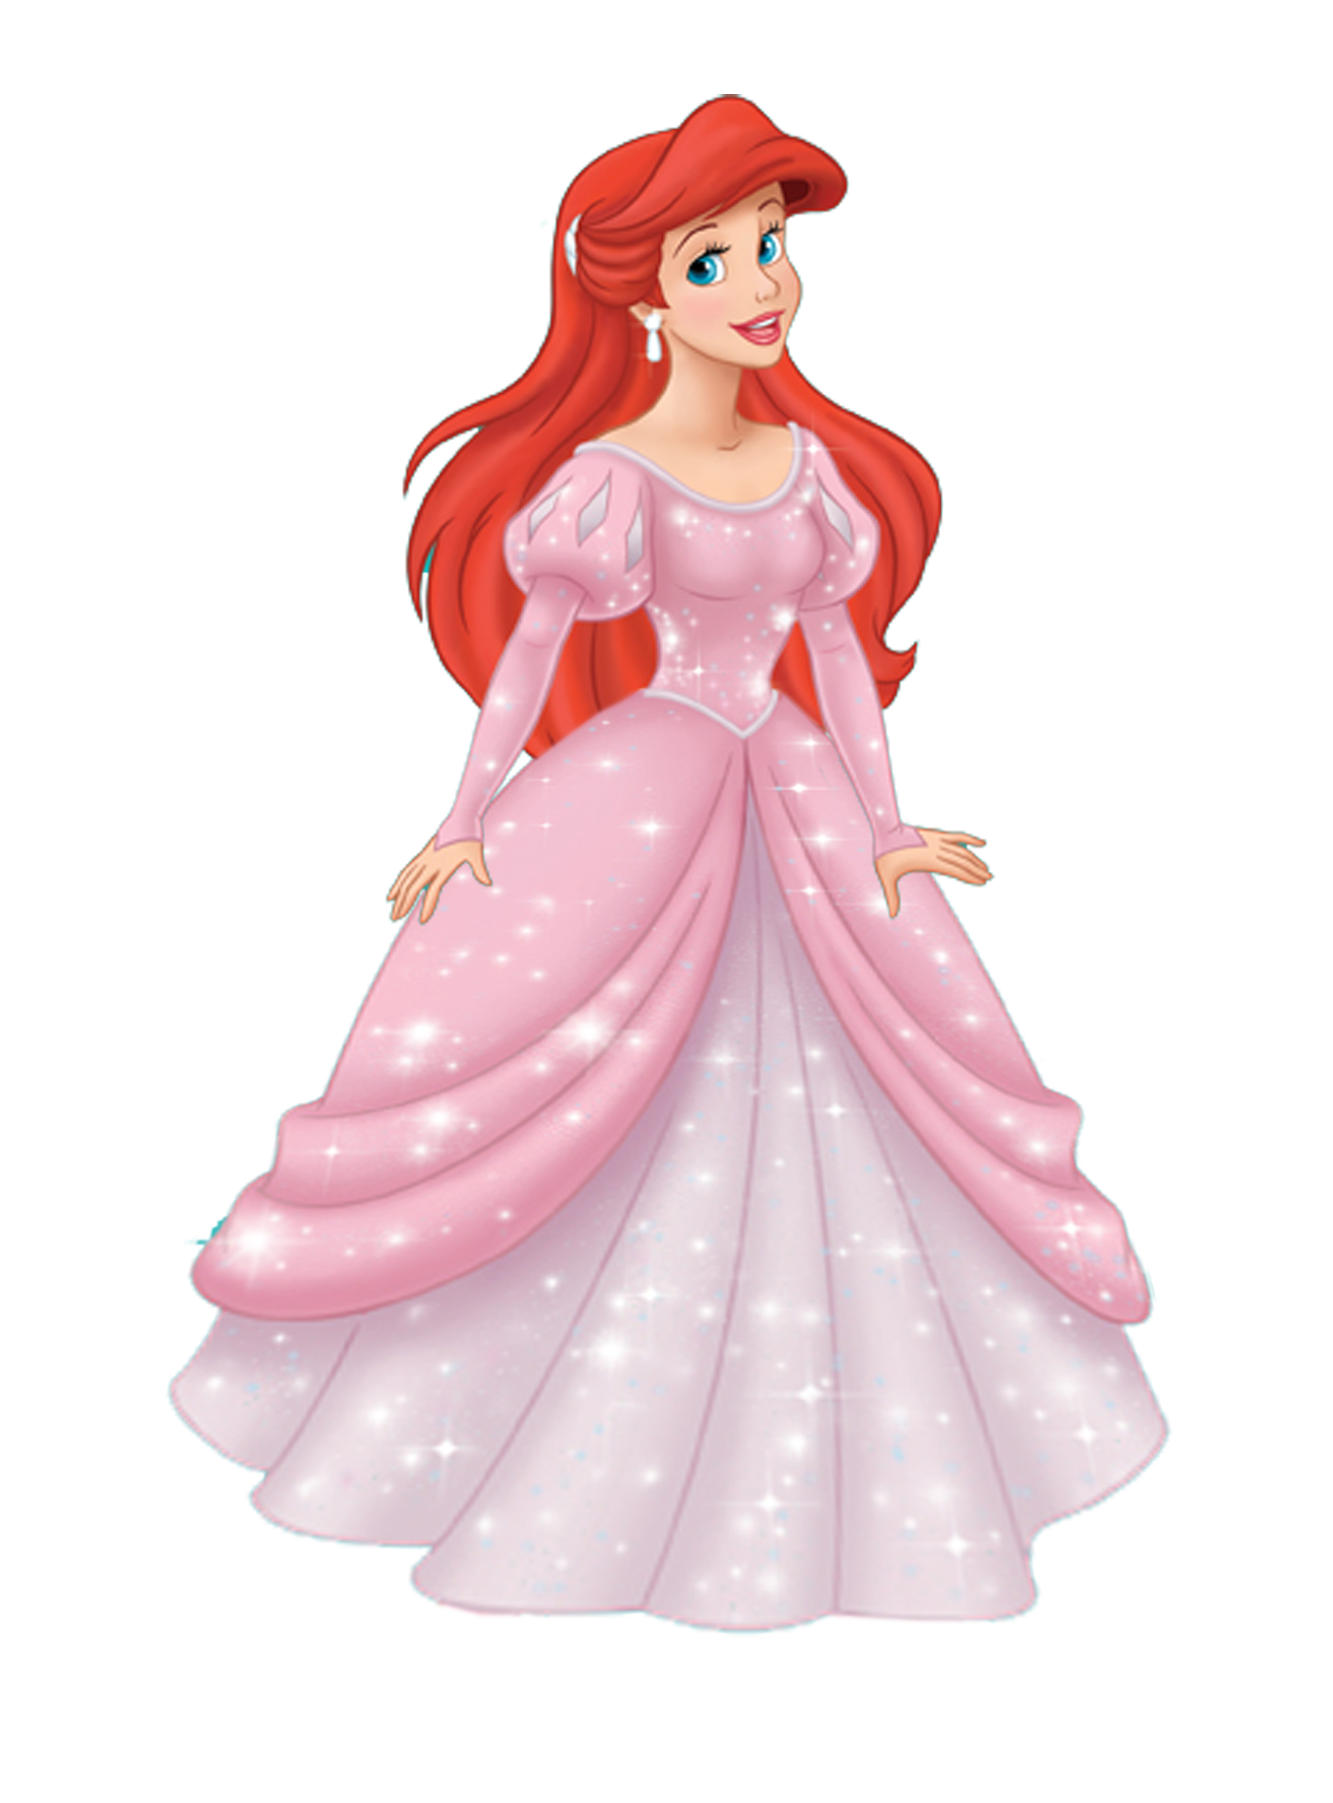 http://static1.wikia.nocookie.net/__cb20120722061212/disney/images/f/fe/Ariel_pink_gown.png